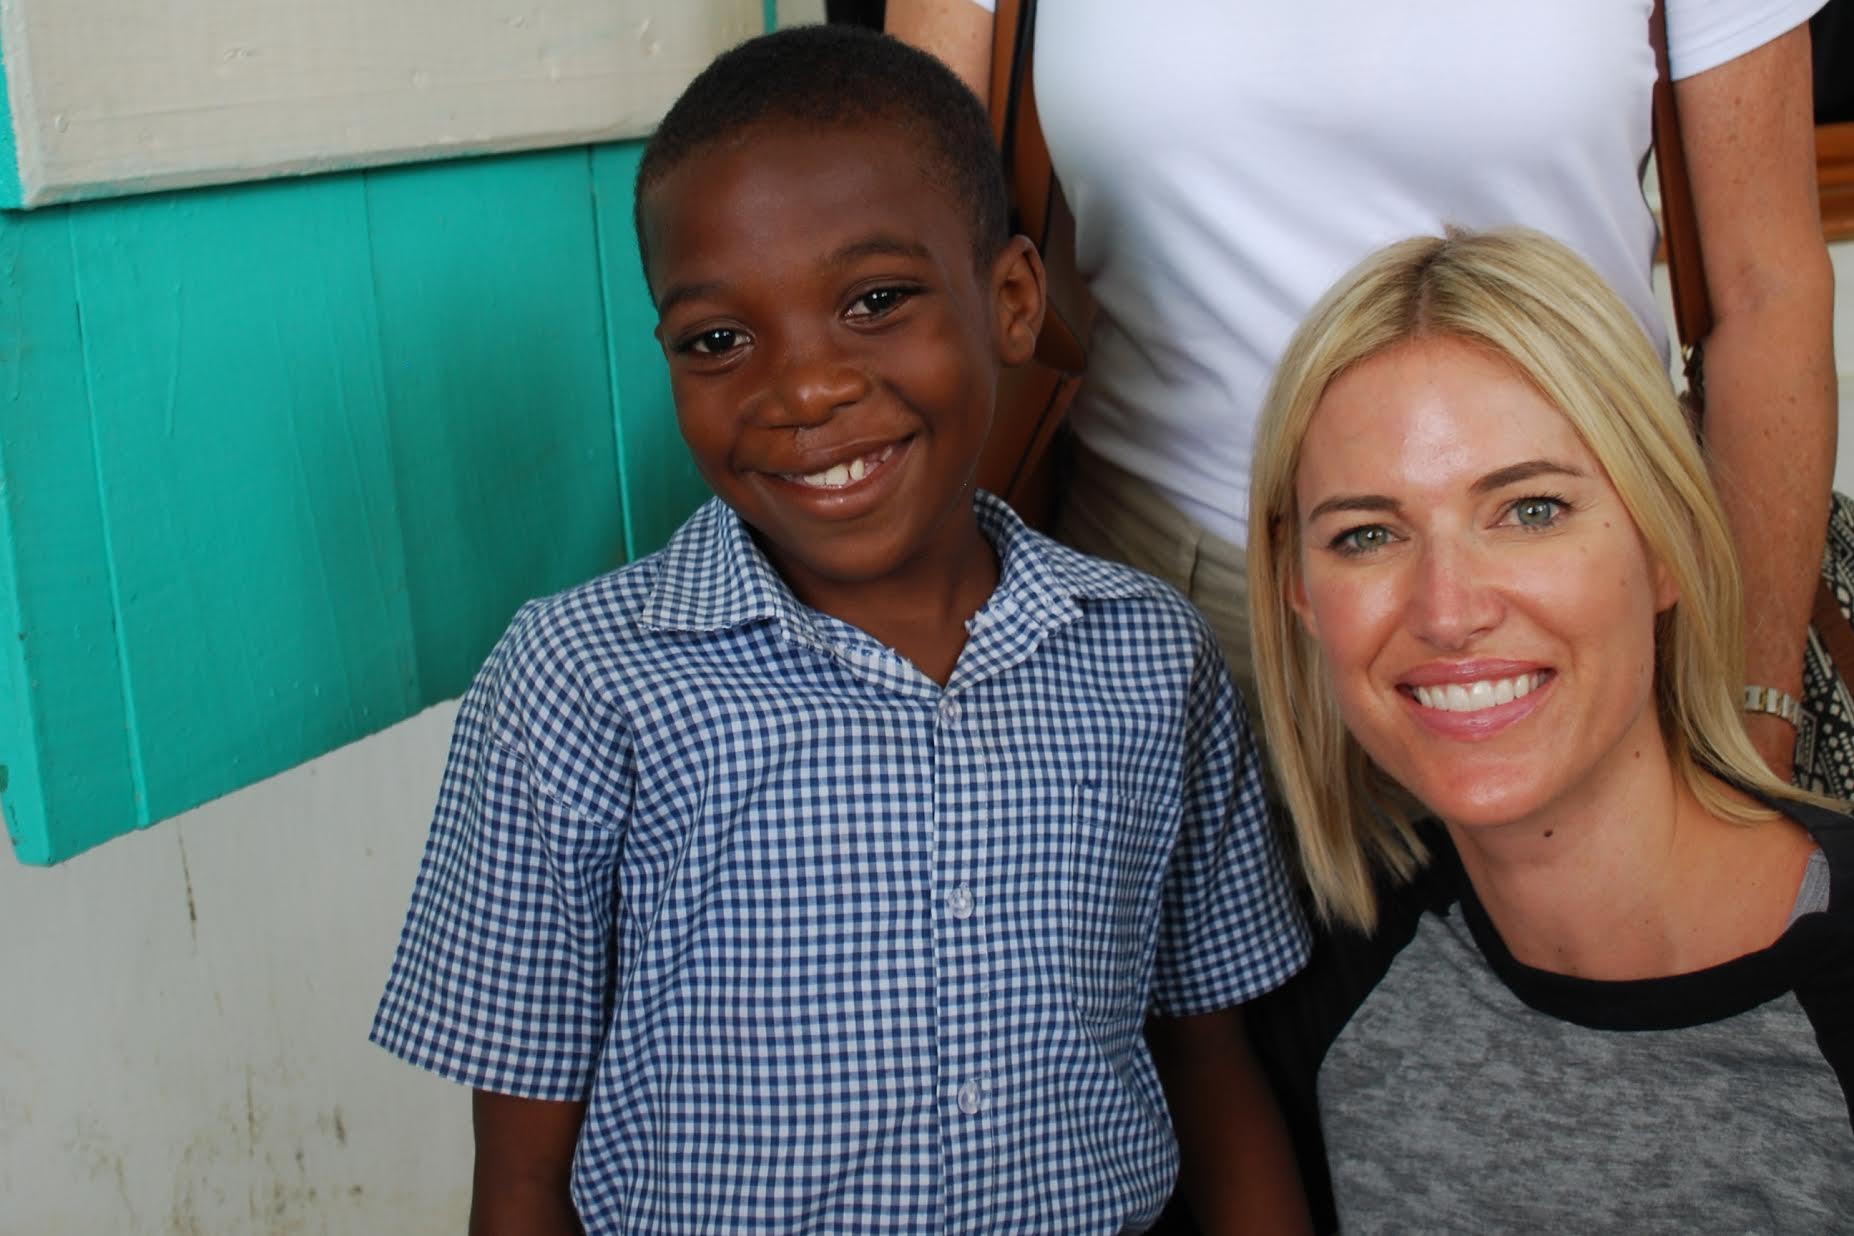 Kristen Taekman shares a smile with a Smile Train patient at Justinian University Hospital in Cap-Haitien, Haiti.